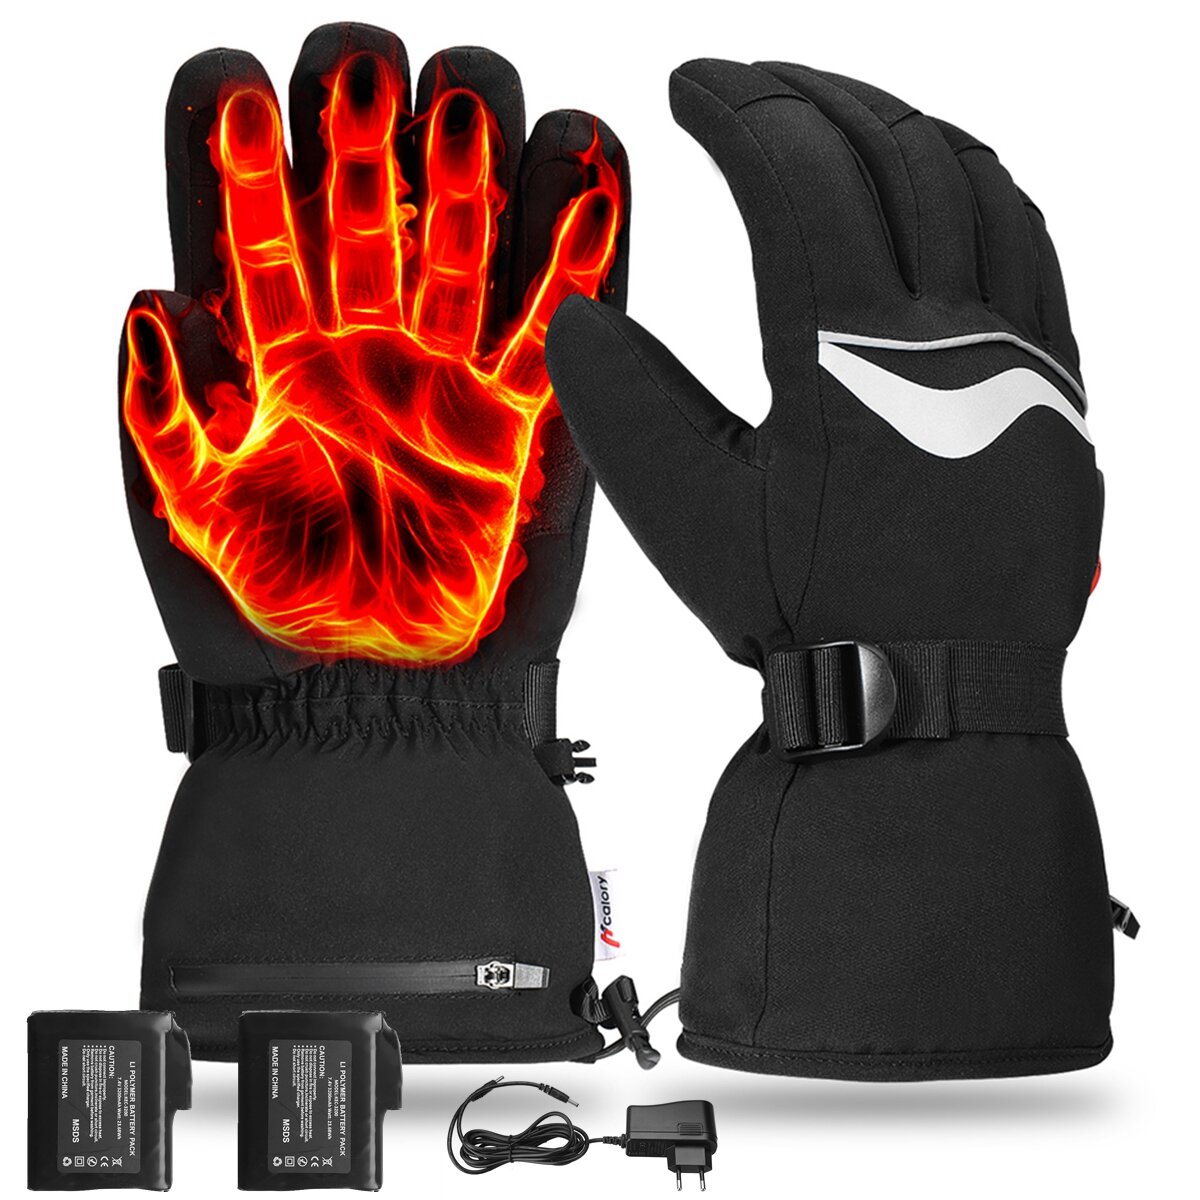 best price,hcalory,45/55/65c,electric,heated,gloves,discount